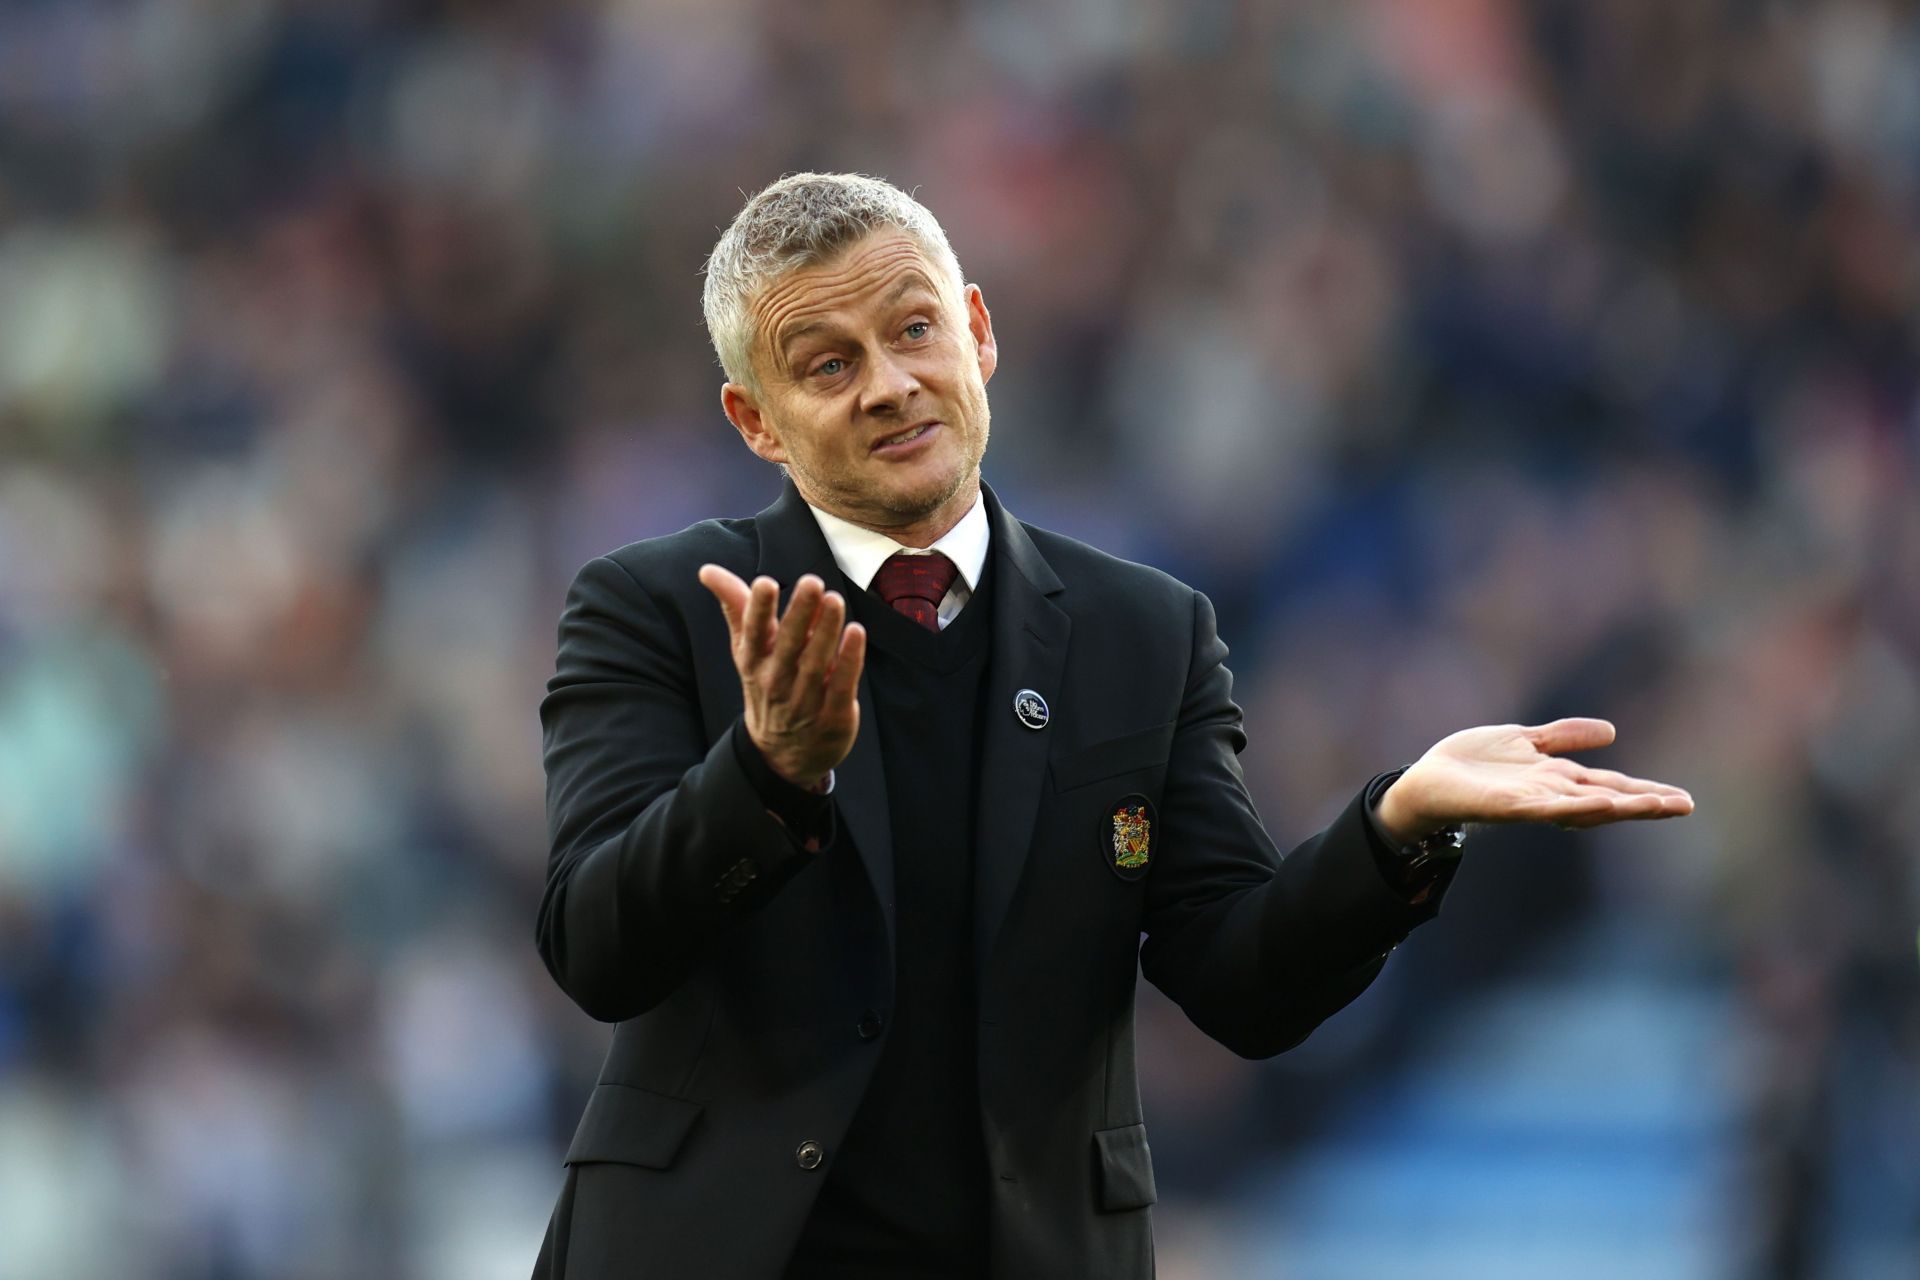 Ole Gunnar Solskjaer is privately unhappy with the Manchester United board.